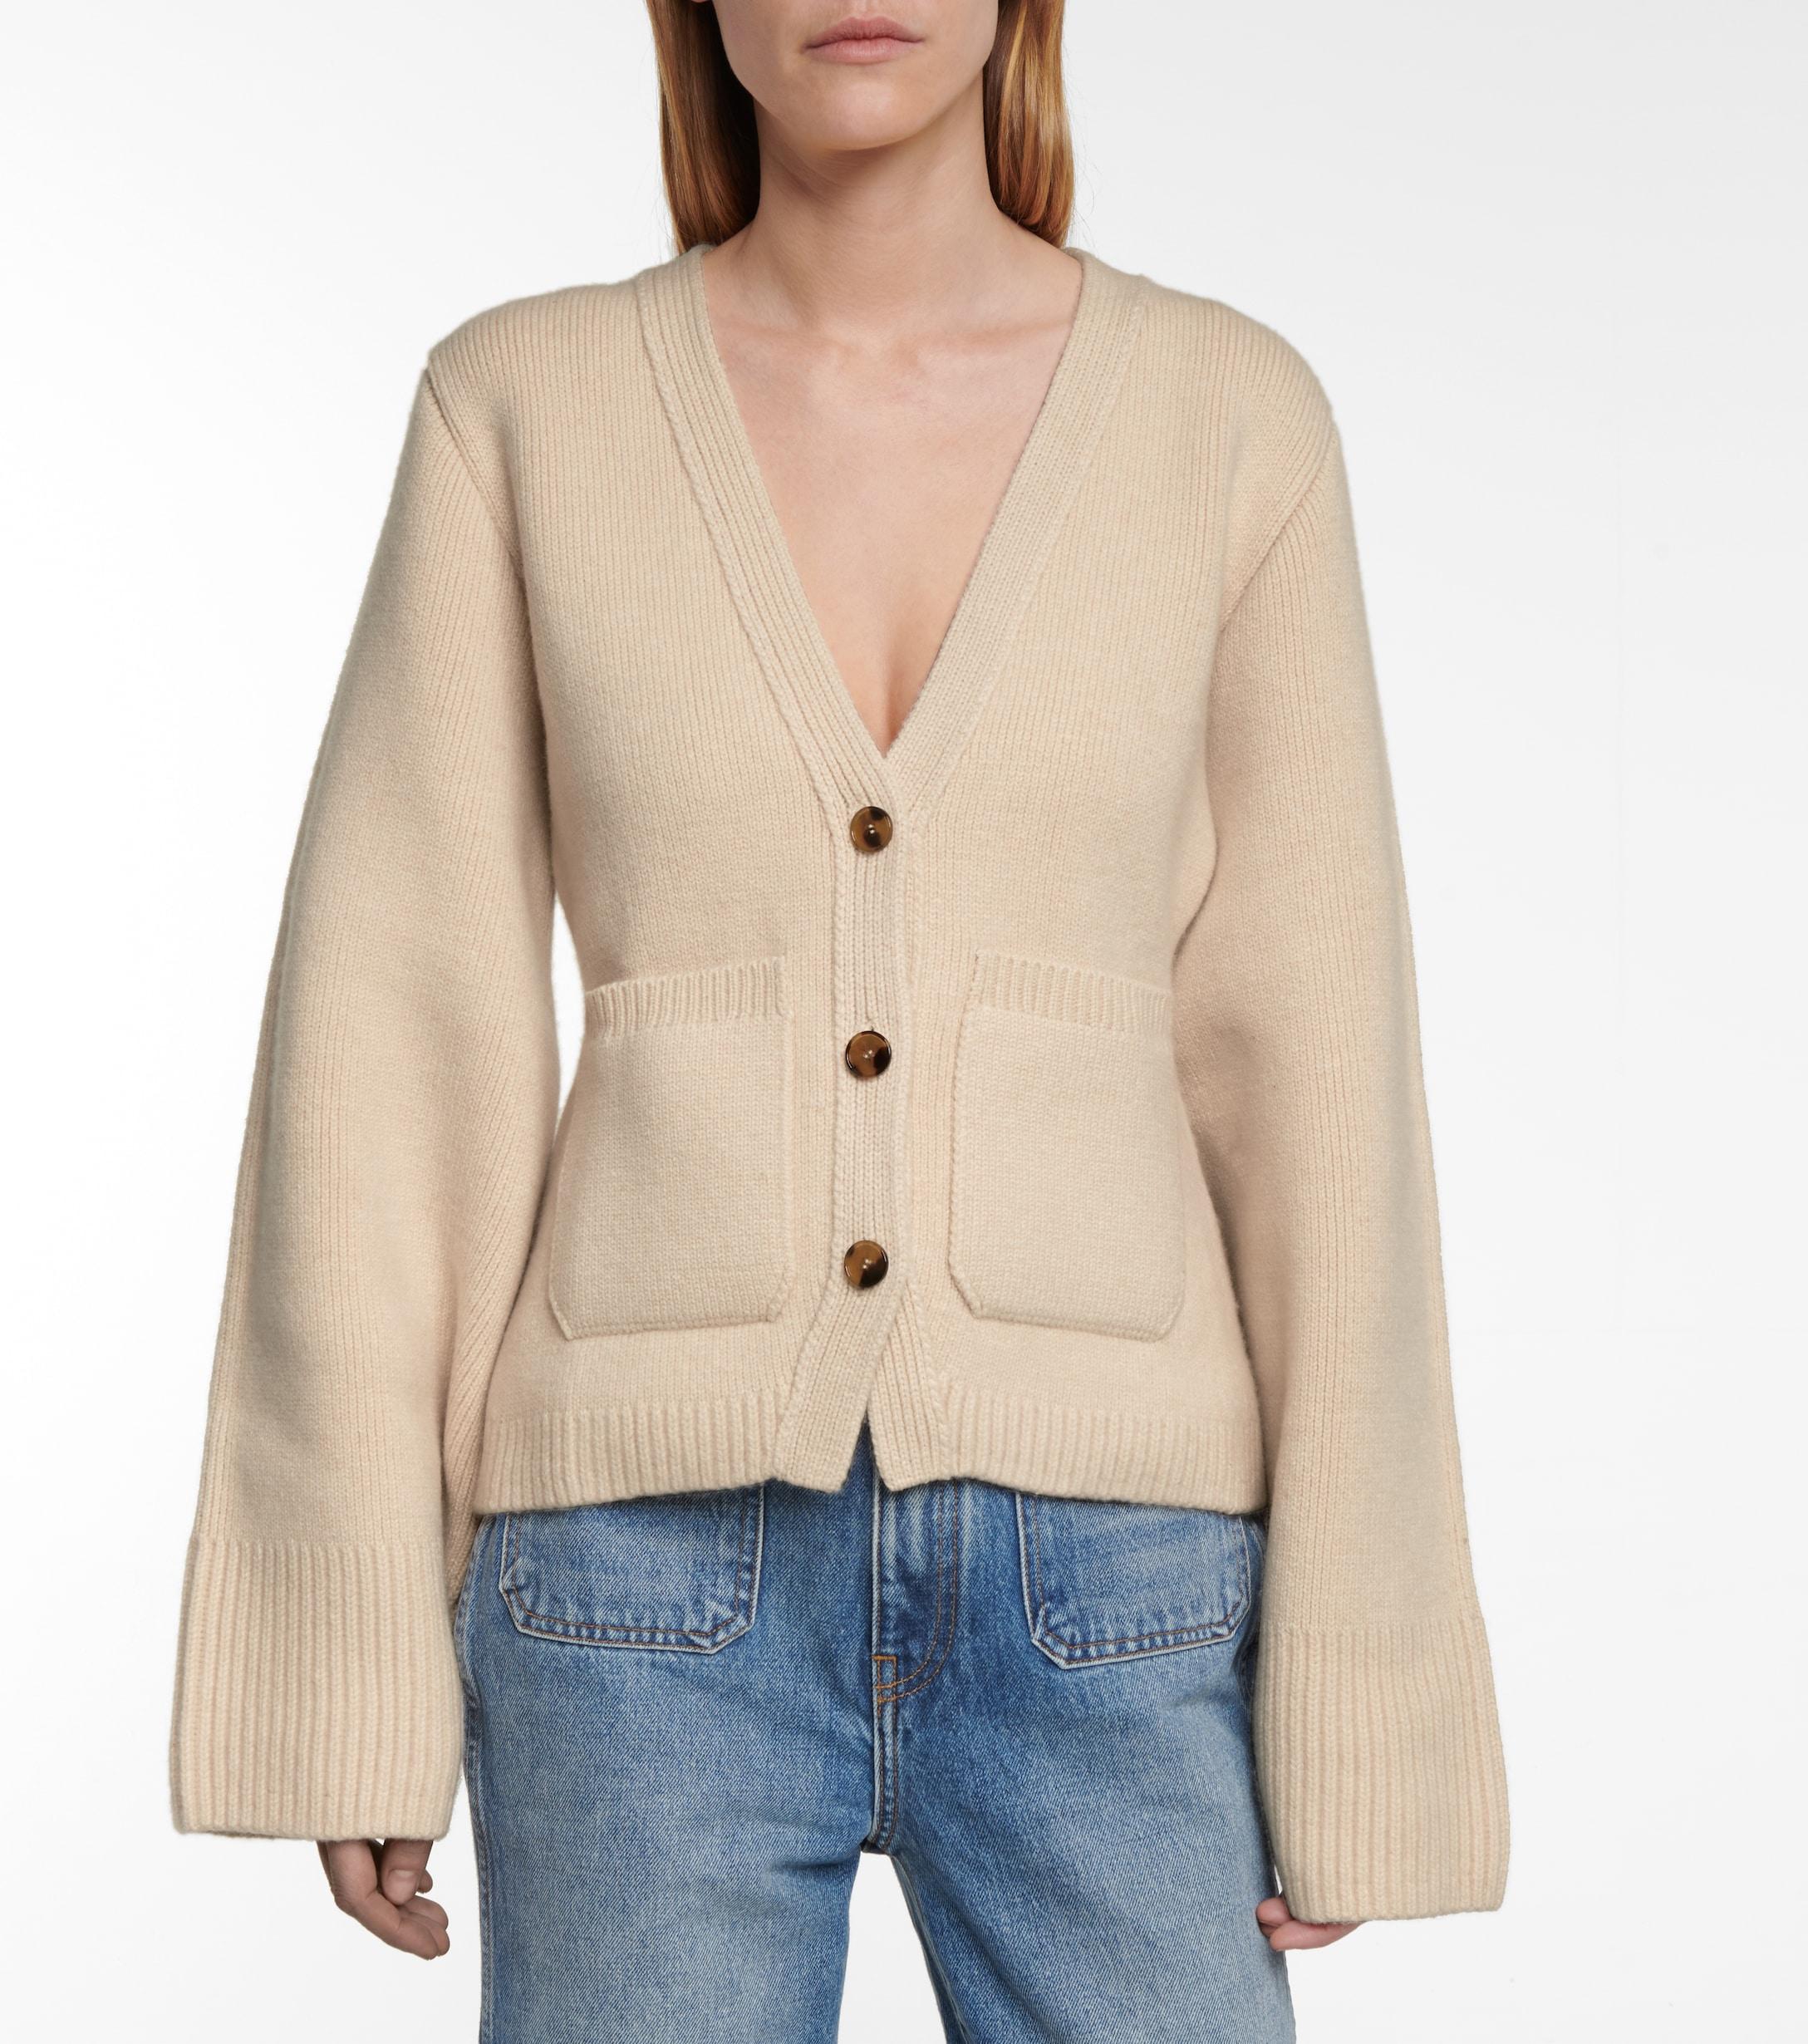 Khaite Exclusive To Mytheresa – Scarlet Cashmere Cardigan in Beige ...